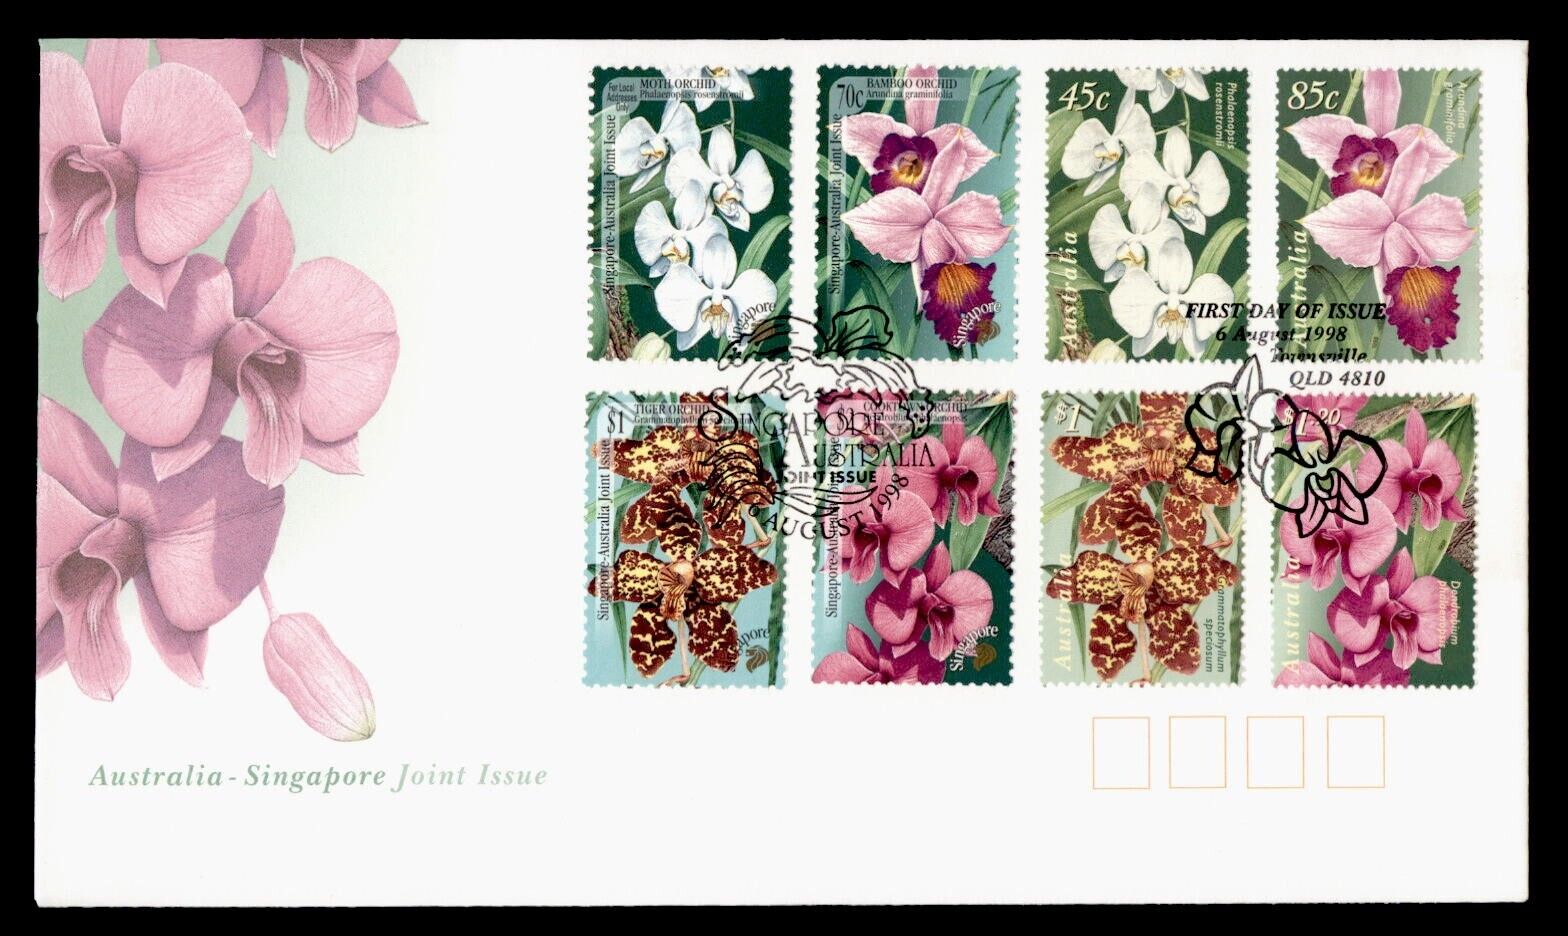 Dr Who 1998 Australia Fdc Joint Issue Singapore Cachet Orchid Flower  I25395